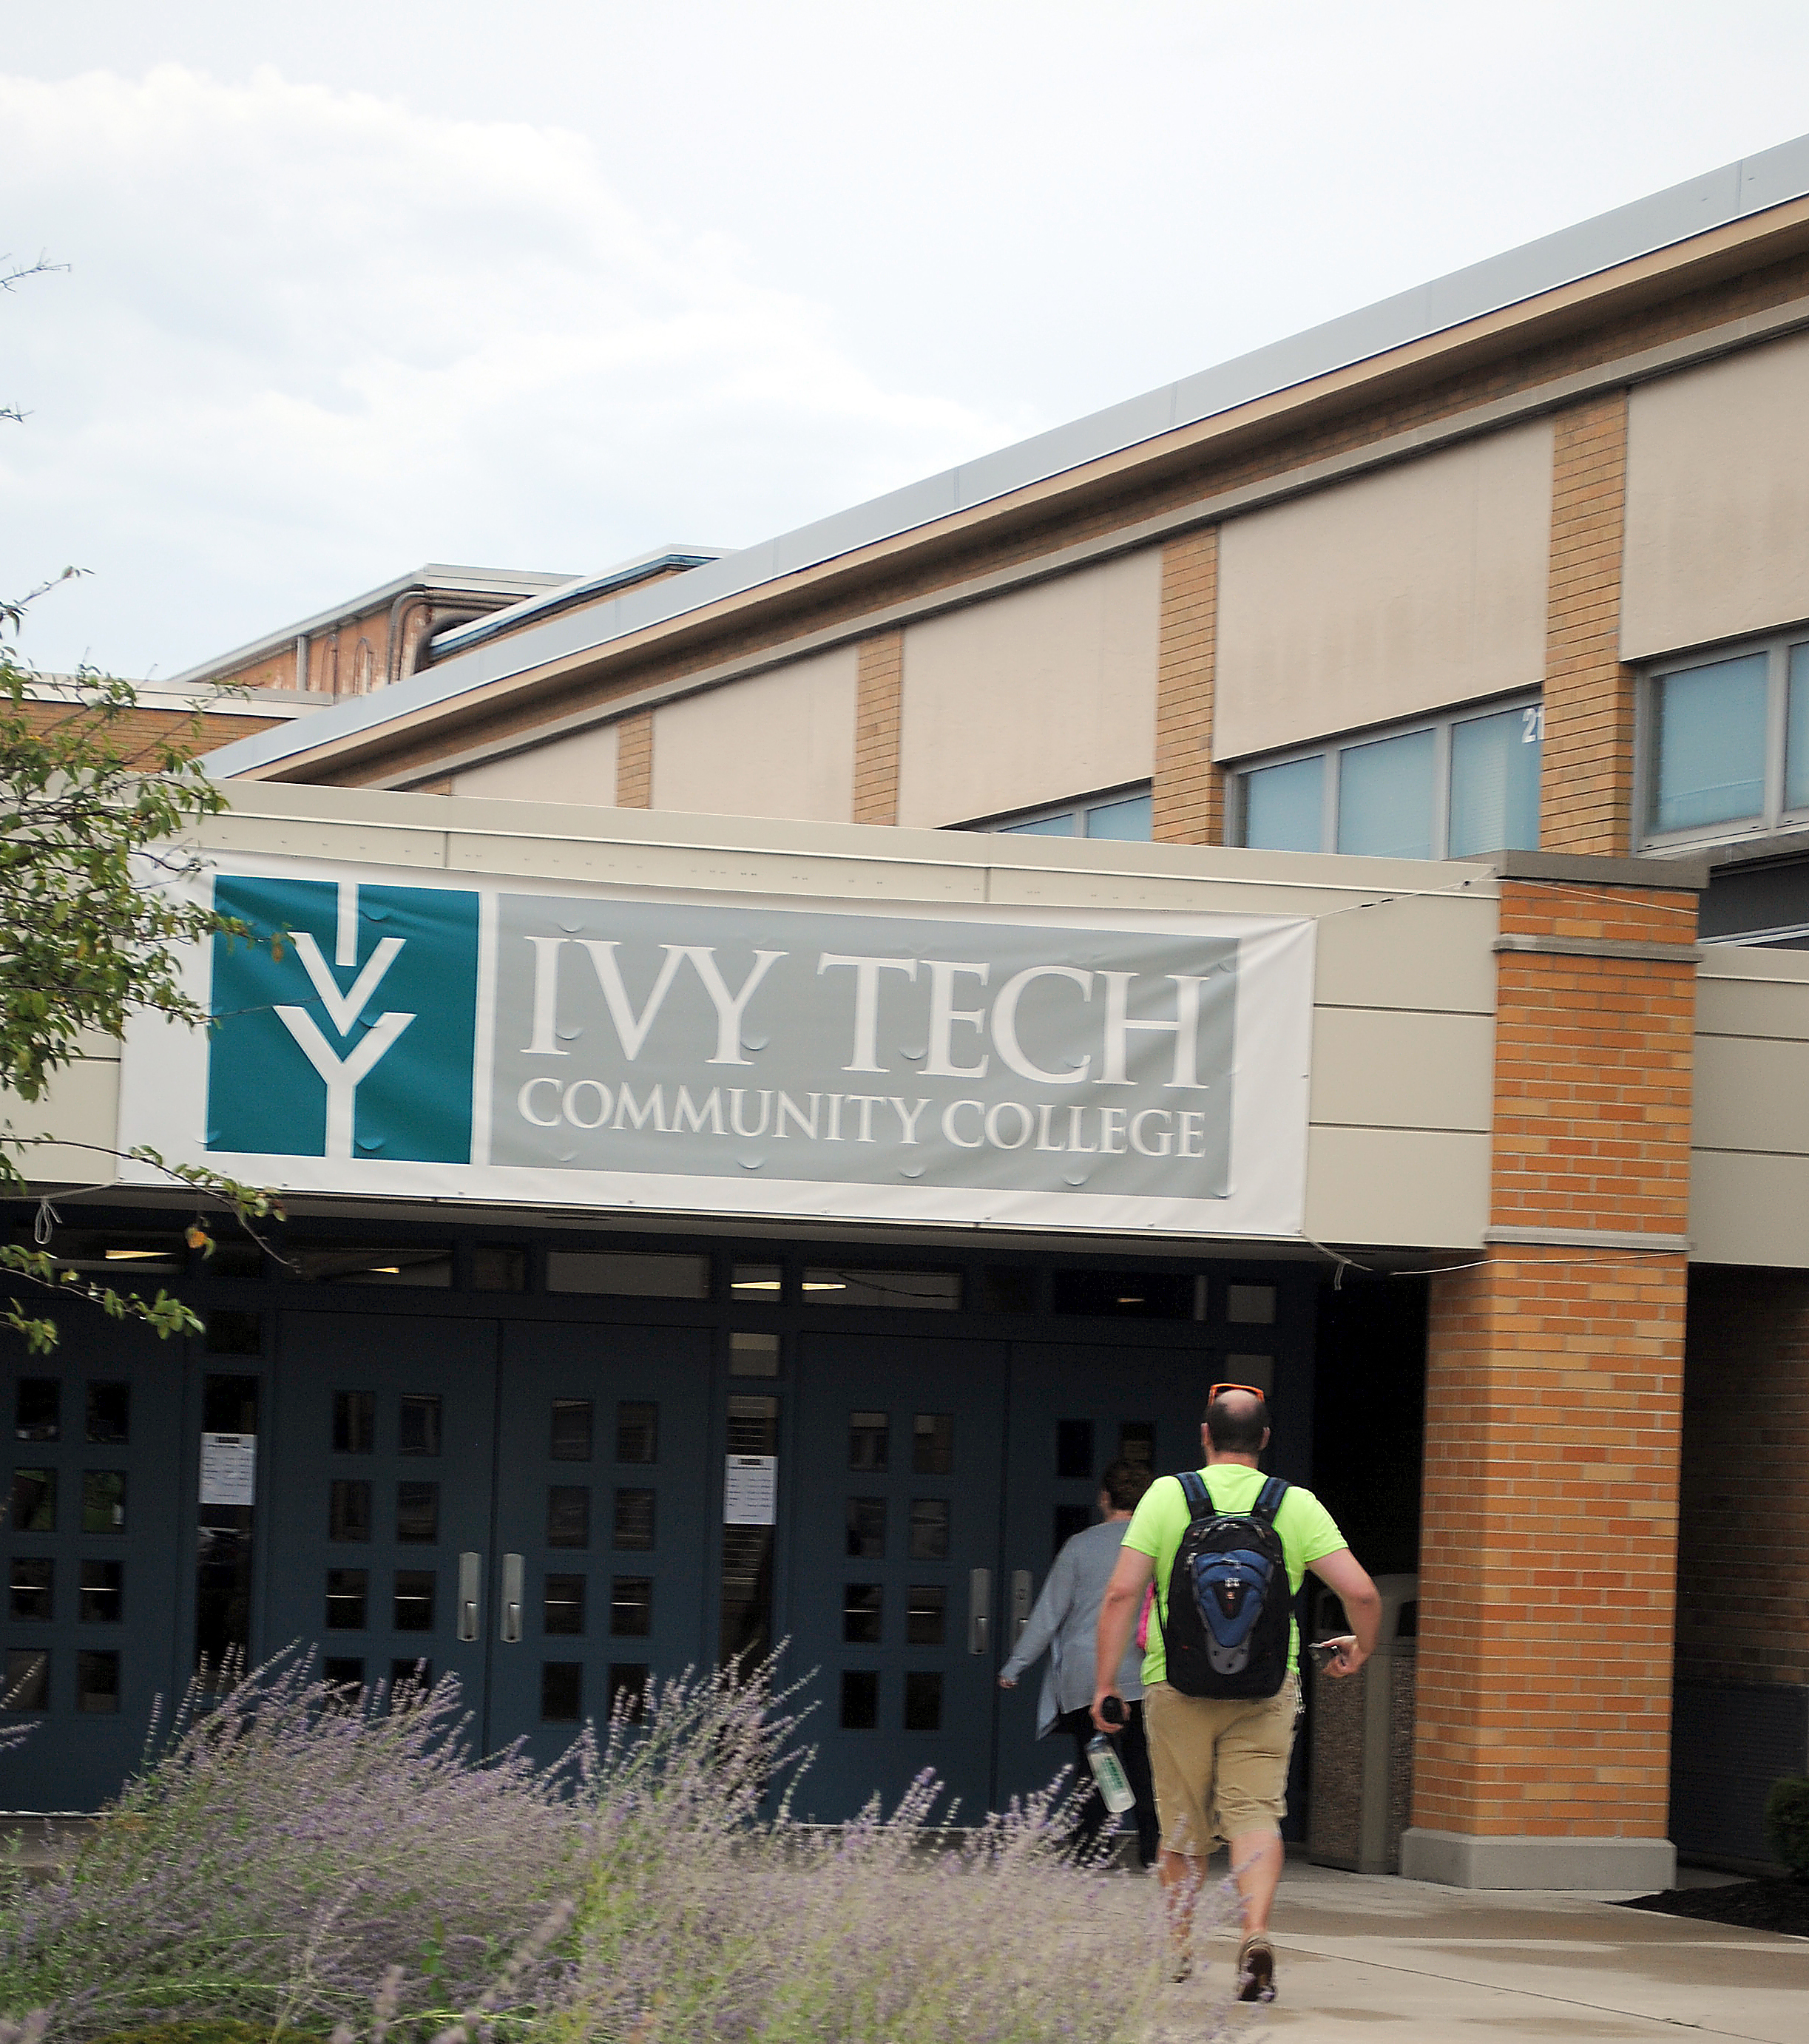 Ivy Tech Hamilton County Campus opened Aug. 25 at the former Noblesville East Middle School. Officials estimate that 1,300 students will take classes the first year and more than 3,000 in 2015. (Photo by Robert Herrington)